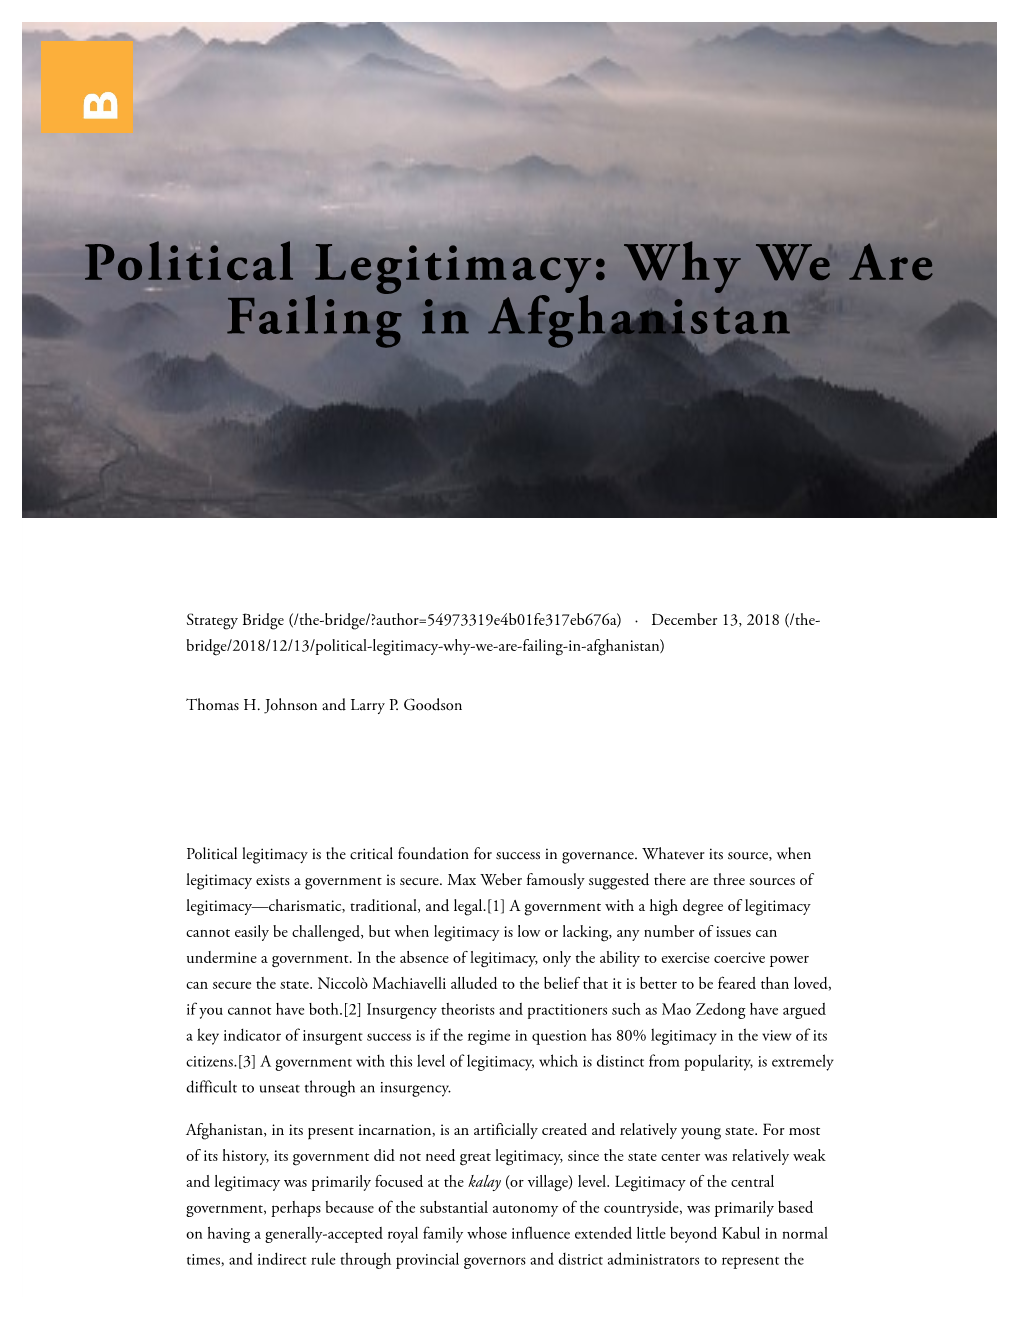 Political Legitimacy: Why We Are Failing in Afghanistan